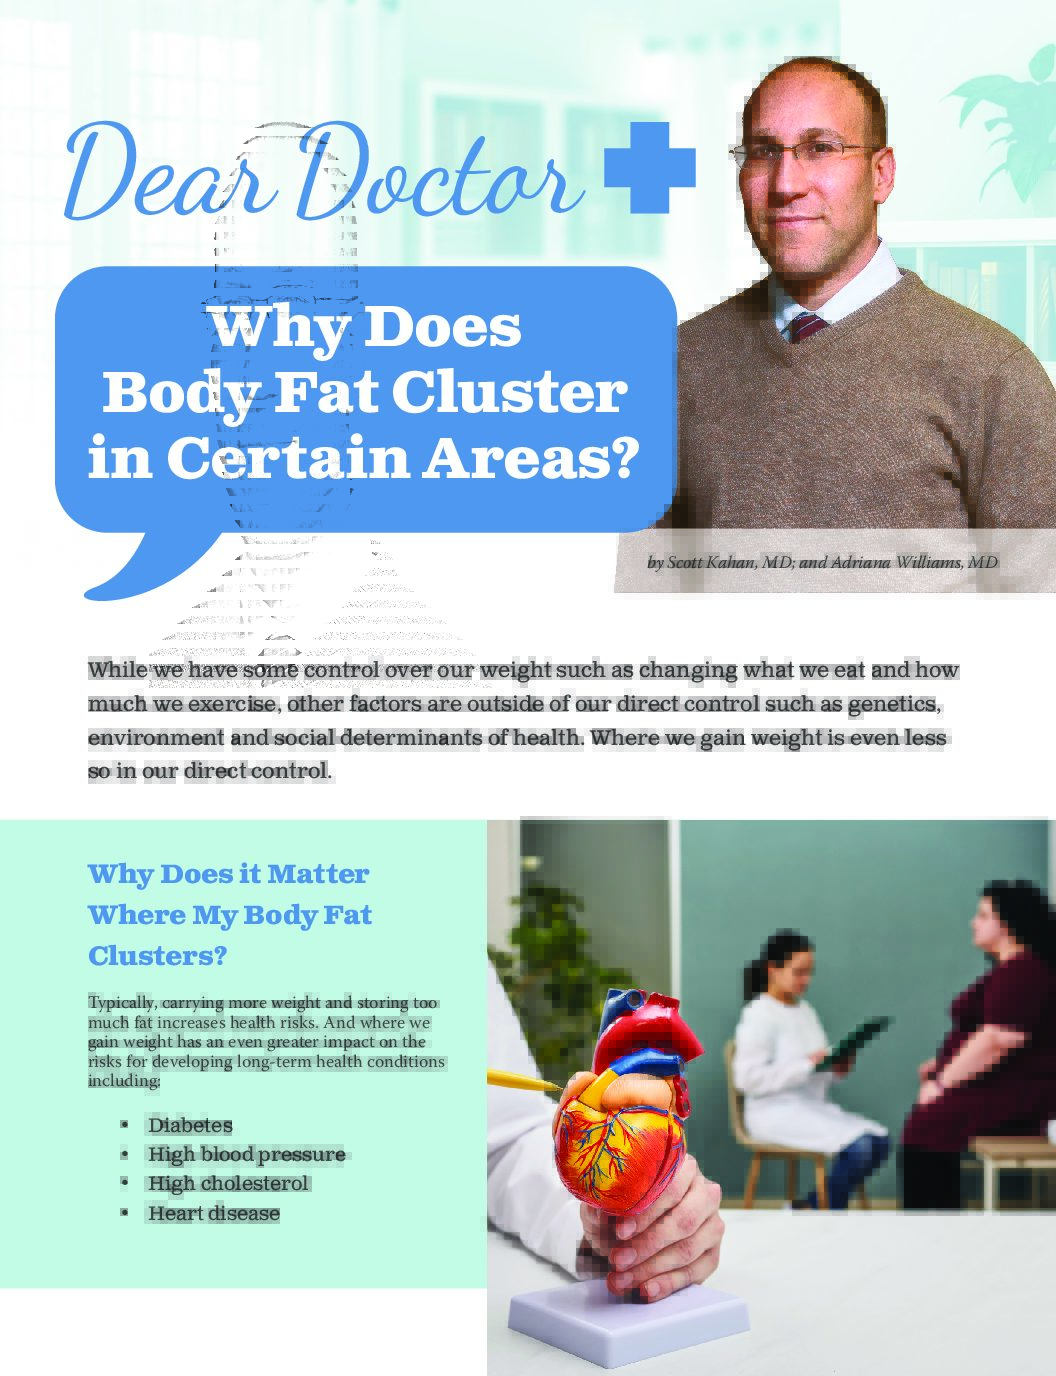 https://www.obesityaction.org/wp-content/uploads/Pages-from-Dear-Doctor_body-fat-cluster-pdf.jpg